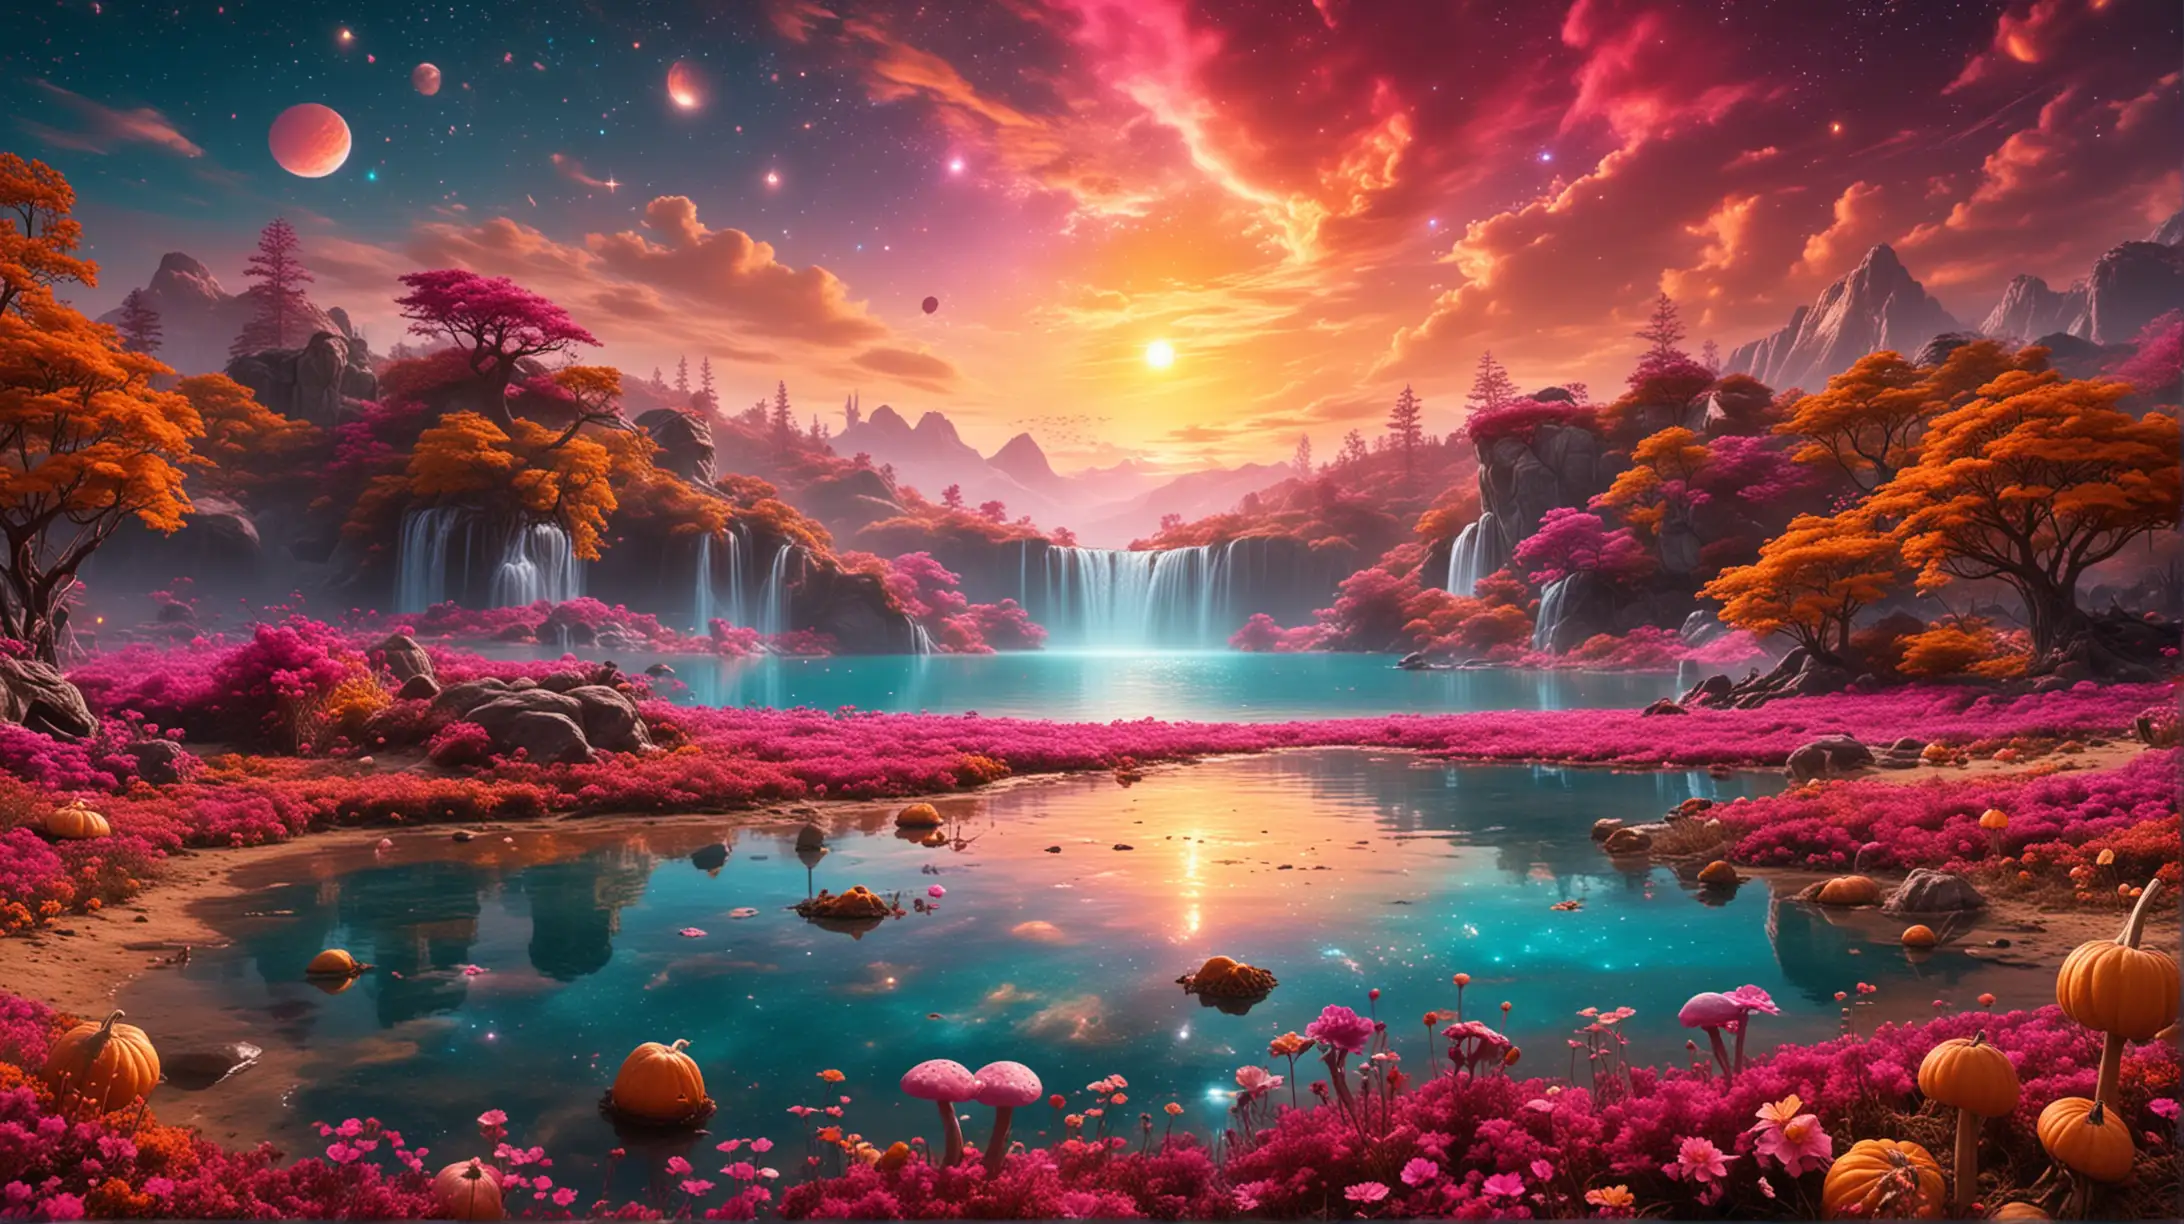 florescent fairytale pumpkins and mushrooms of Orange and Pink and golden-magenta in golden dust and a magical turquoise glowing lake and waterfall of luminescent  magenta flowers, giant magenta-fire planet in the sky among galaxies.